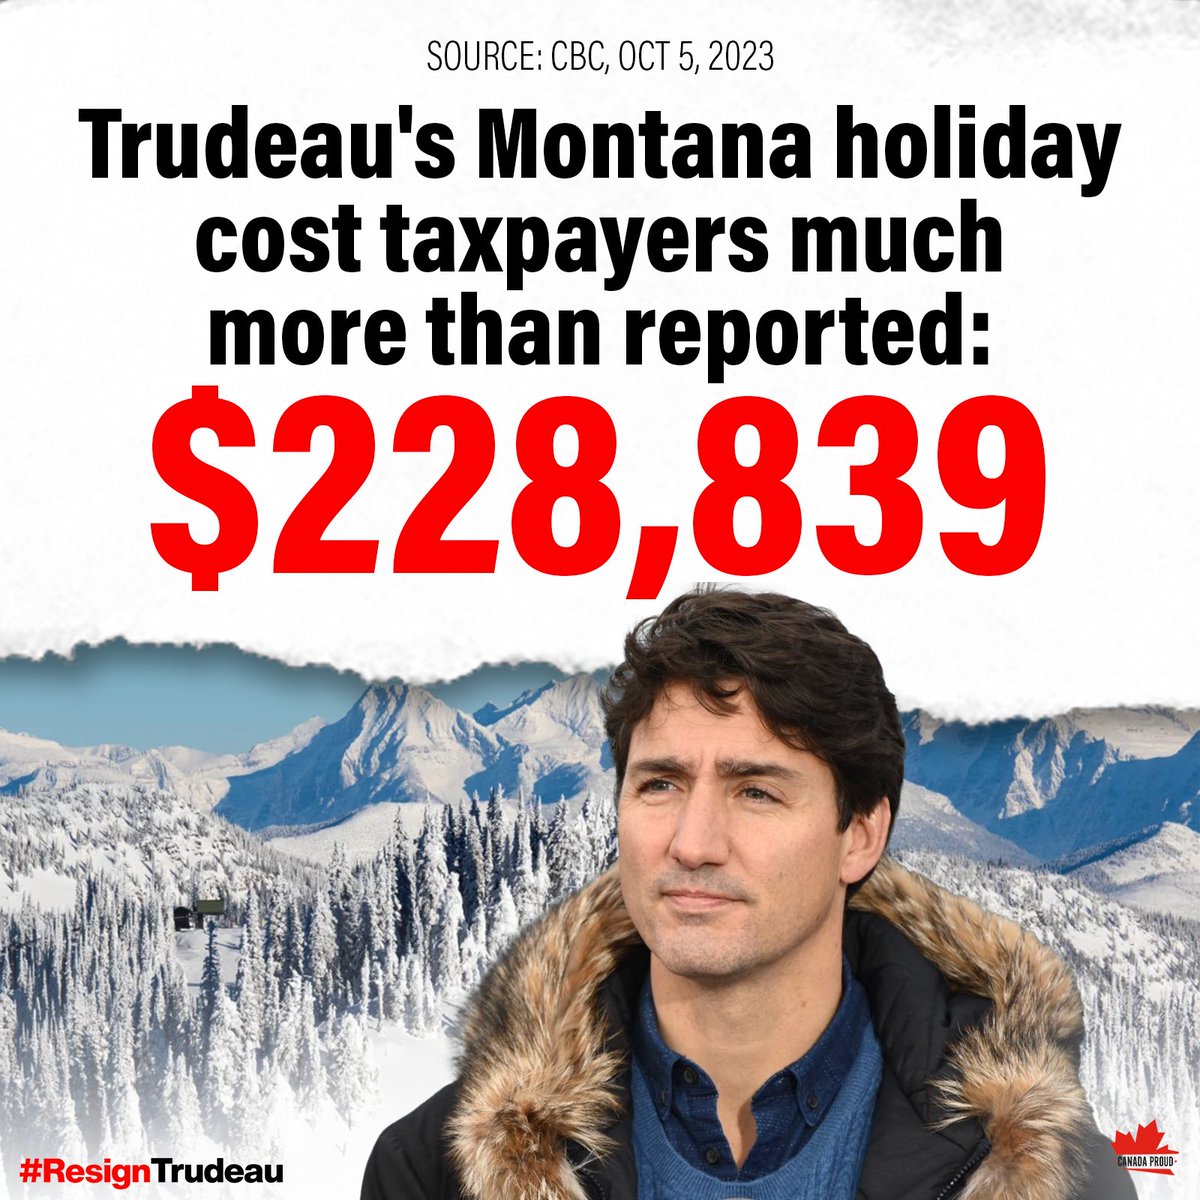 The Trudeau Liberals initially claimed the trip was less than $24,000.